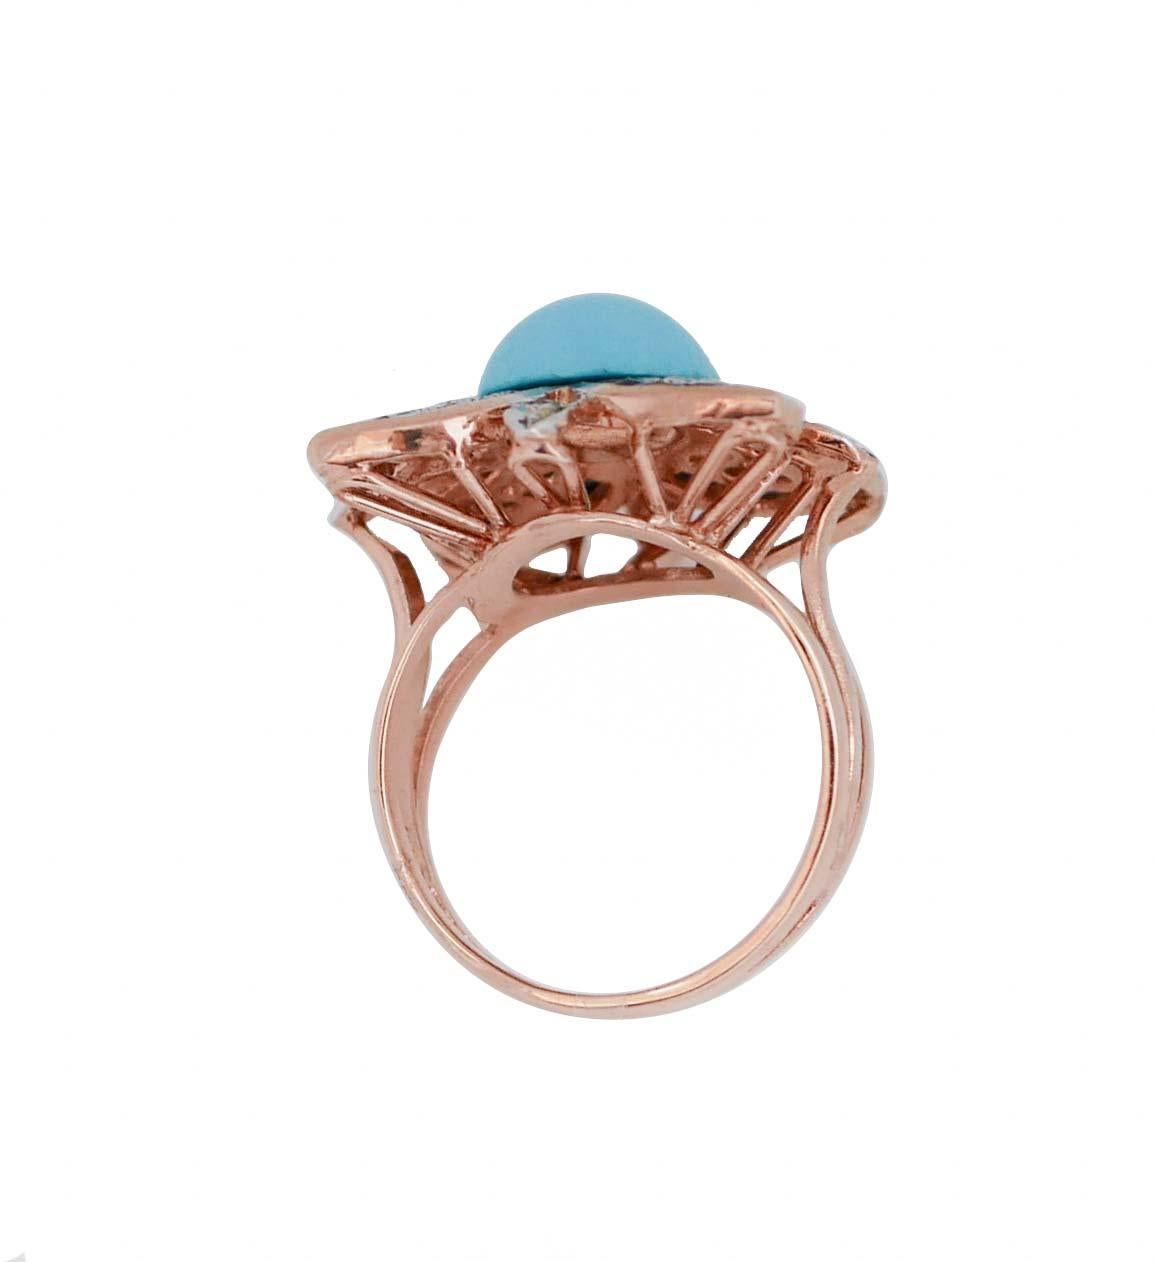 Retro Magnesite, Sapphires, Diamonds, Rose Gold and Silver Ring. For Sale